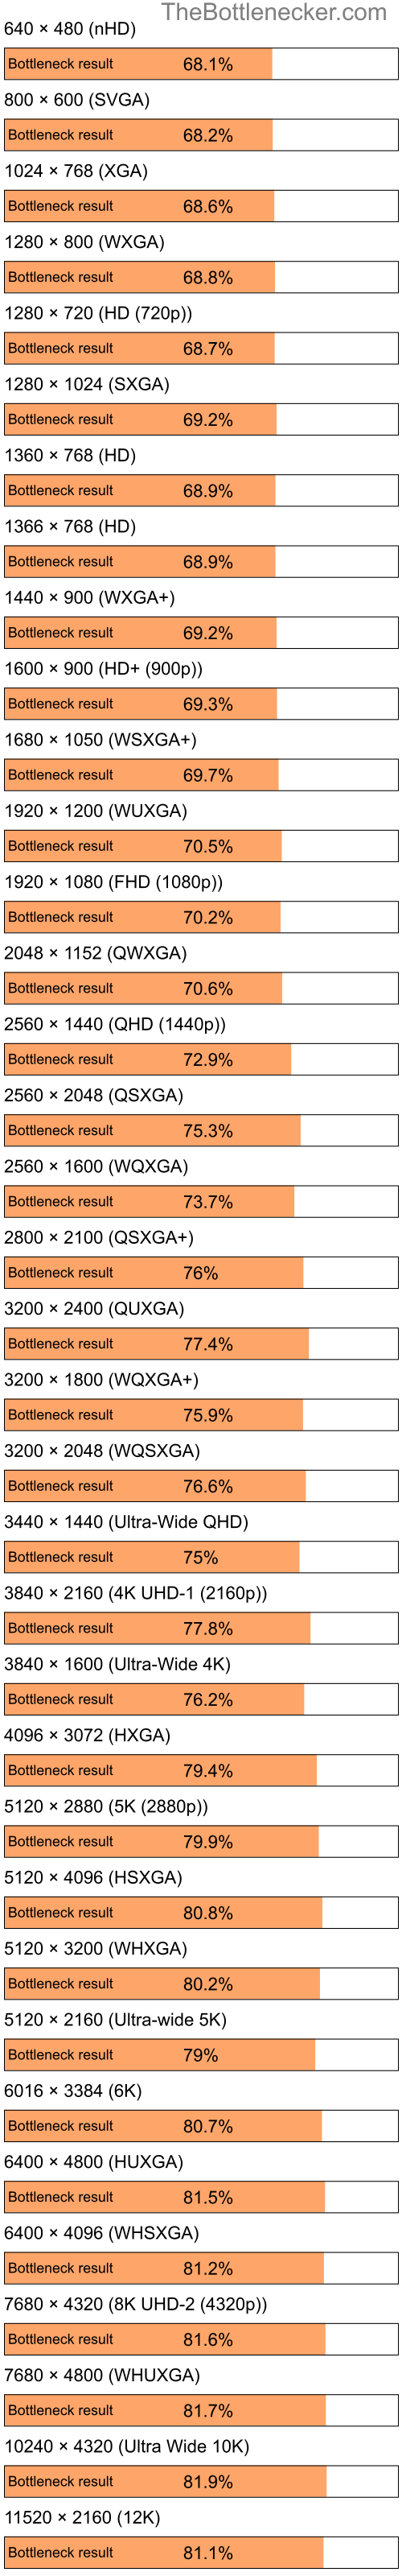 Bottleneck results by resolution for Intel Pentium 4 and AMD Radeon 9500 9700 in Processor Intense Tasks